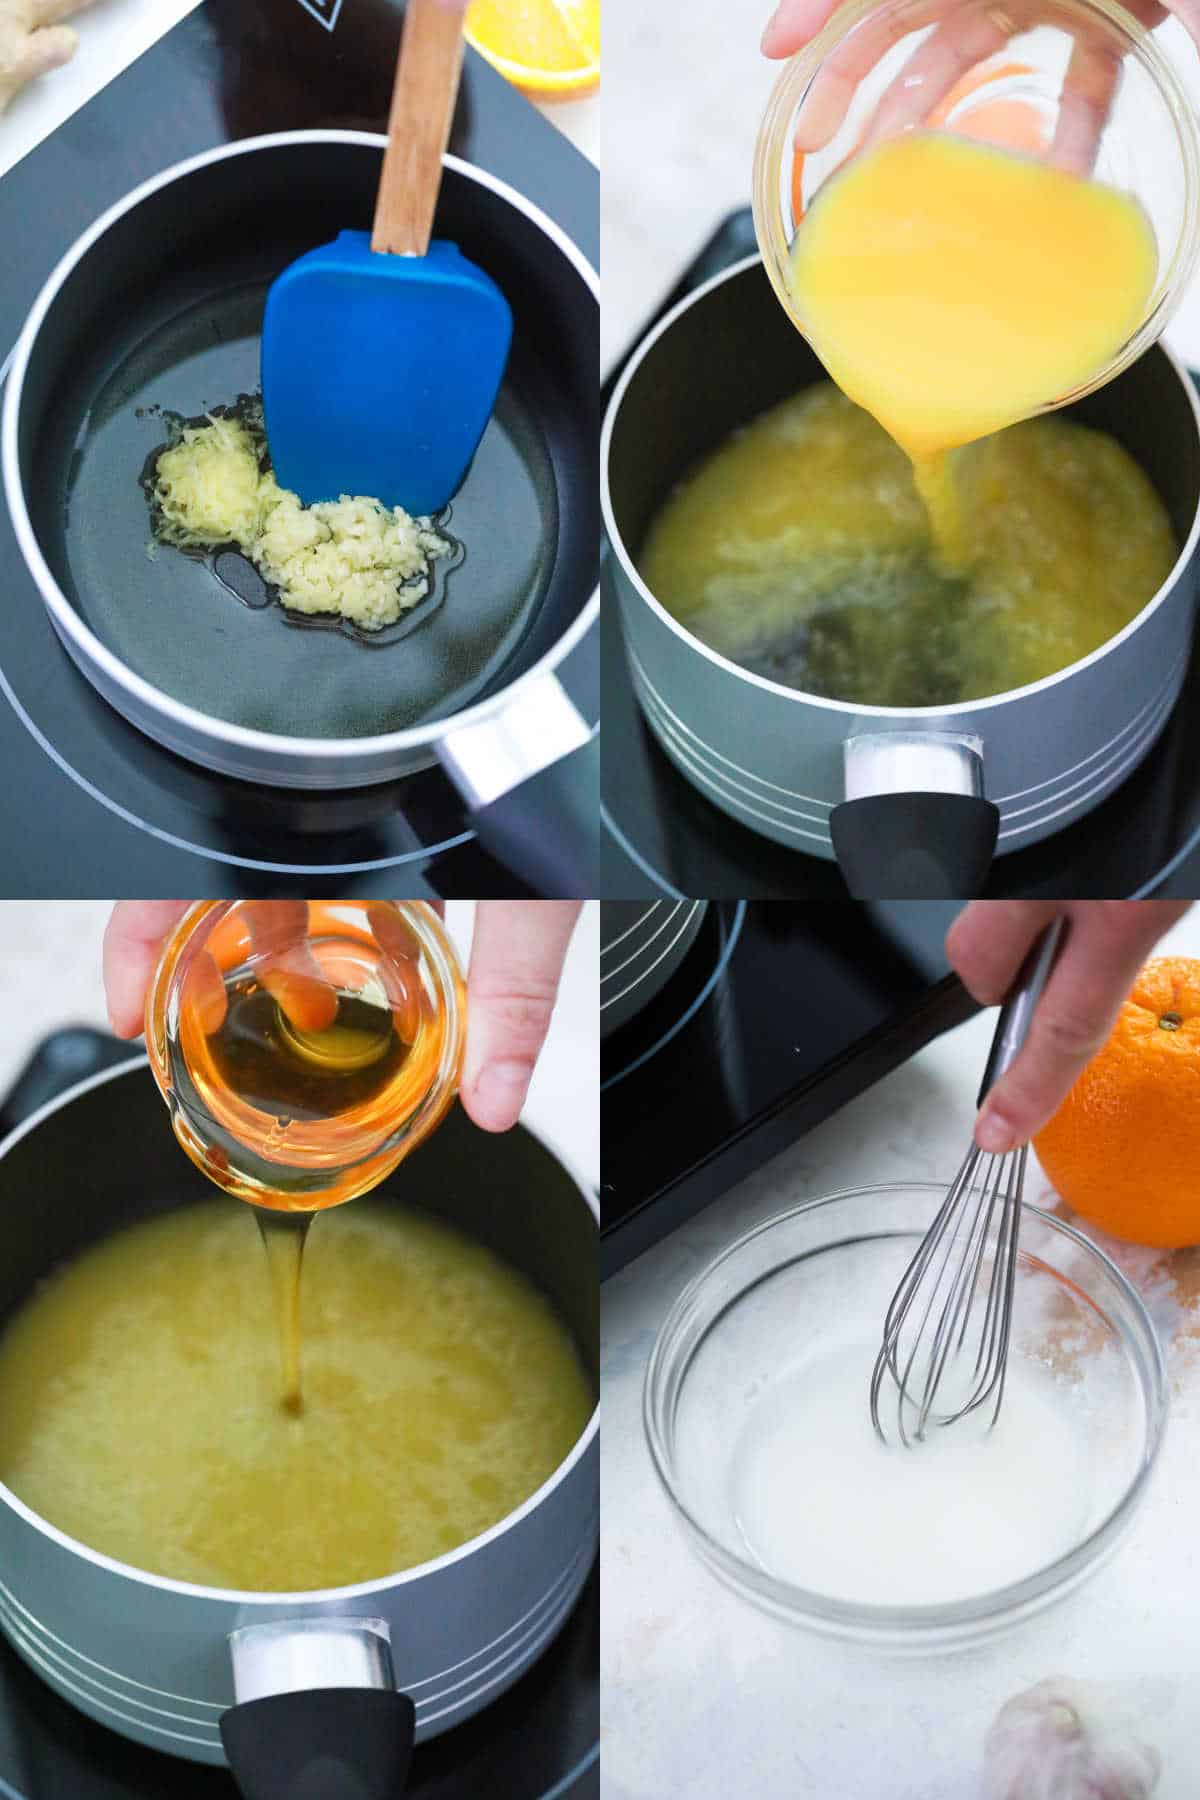 step by step images showing the ingredients added to the sauce pan to make orange sauce